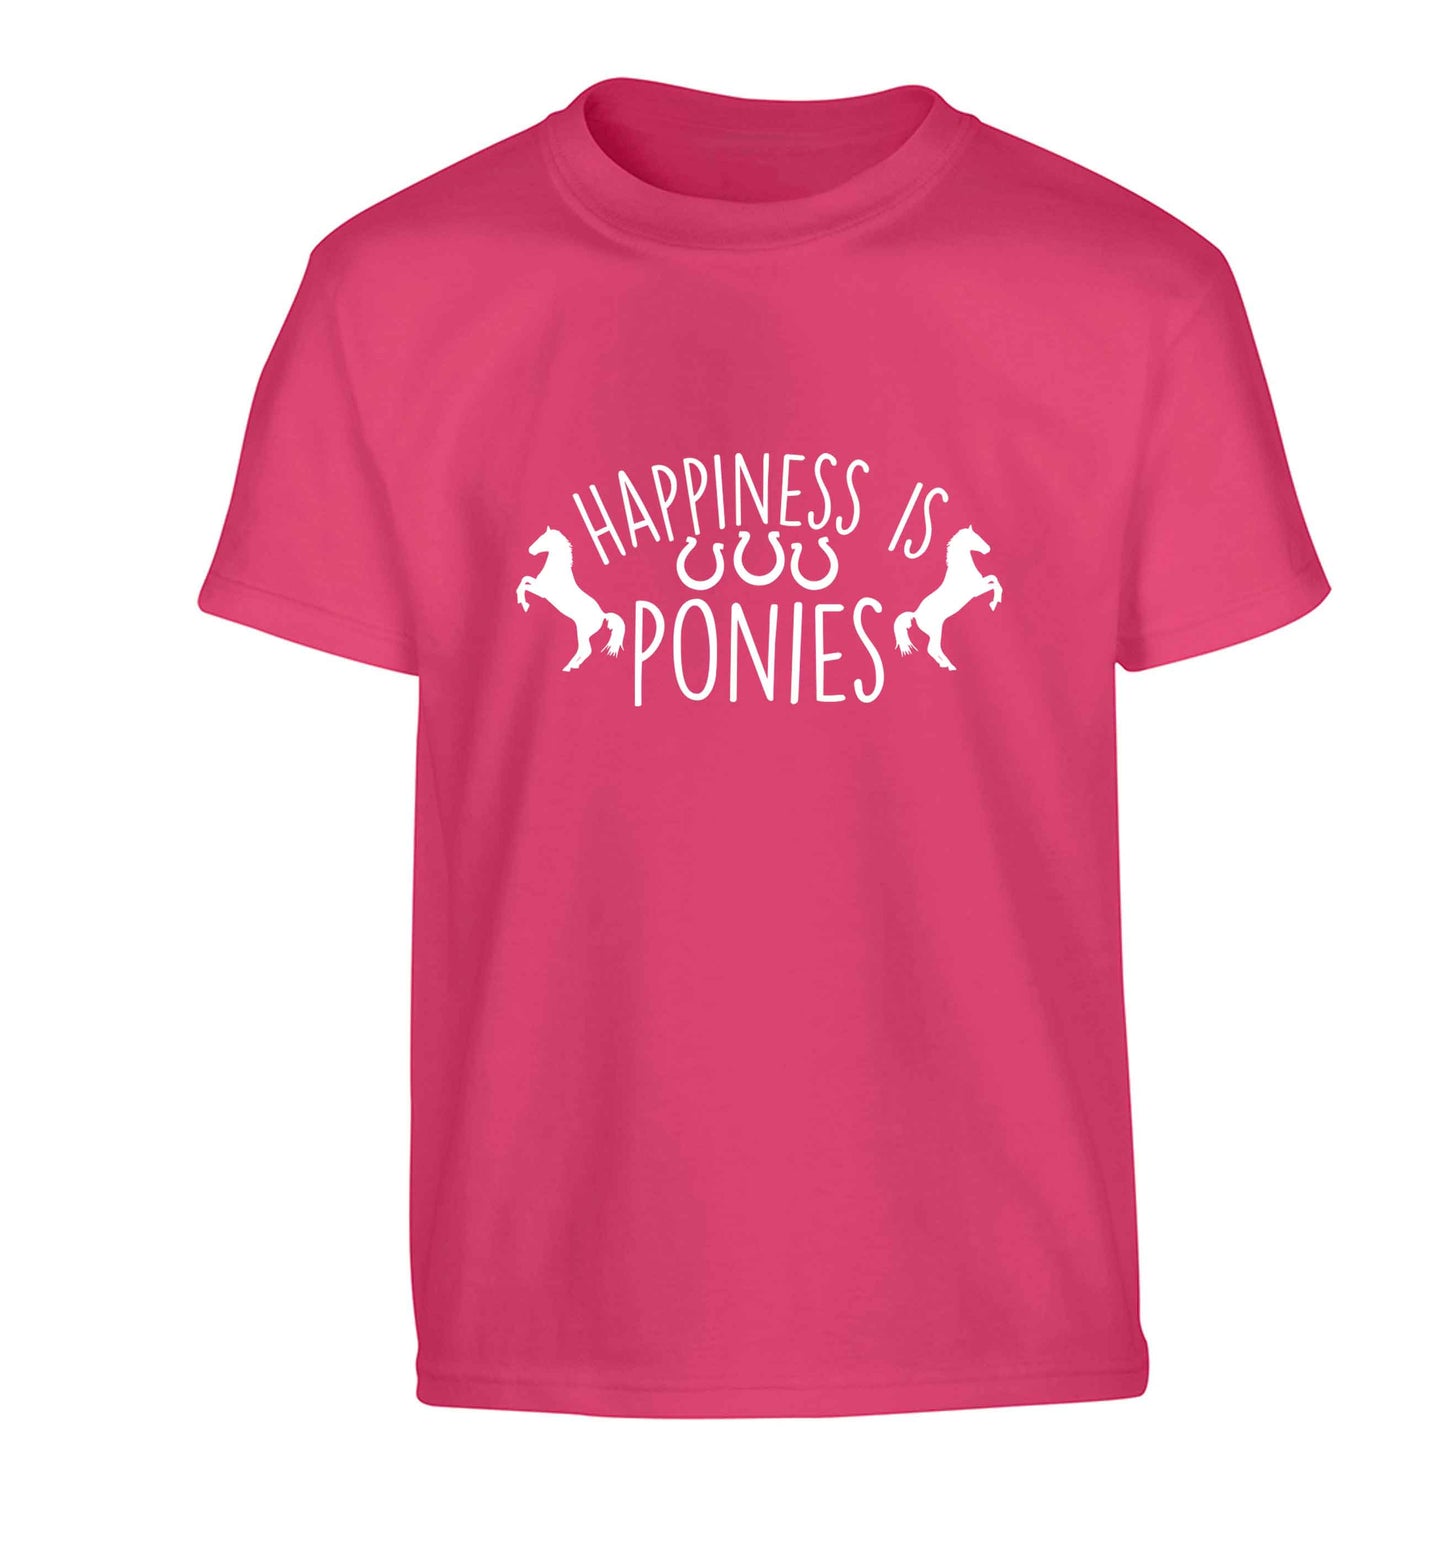 Happiness is ponies Children's pink Tshirt 12-13 Years